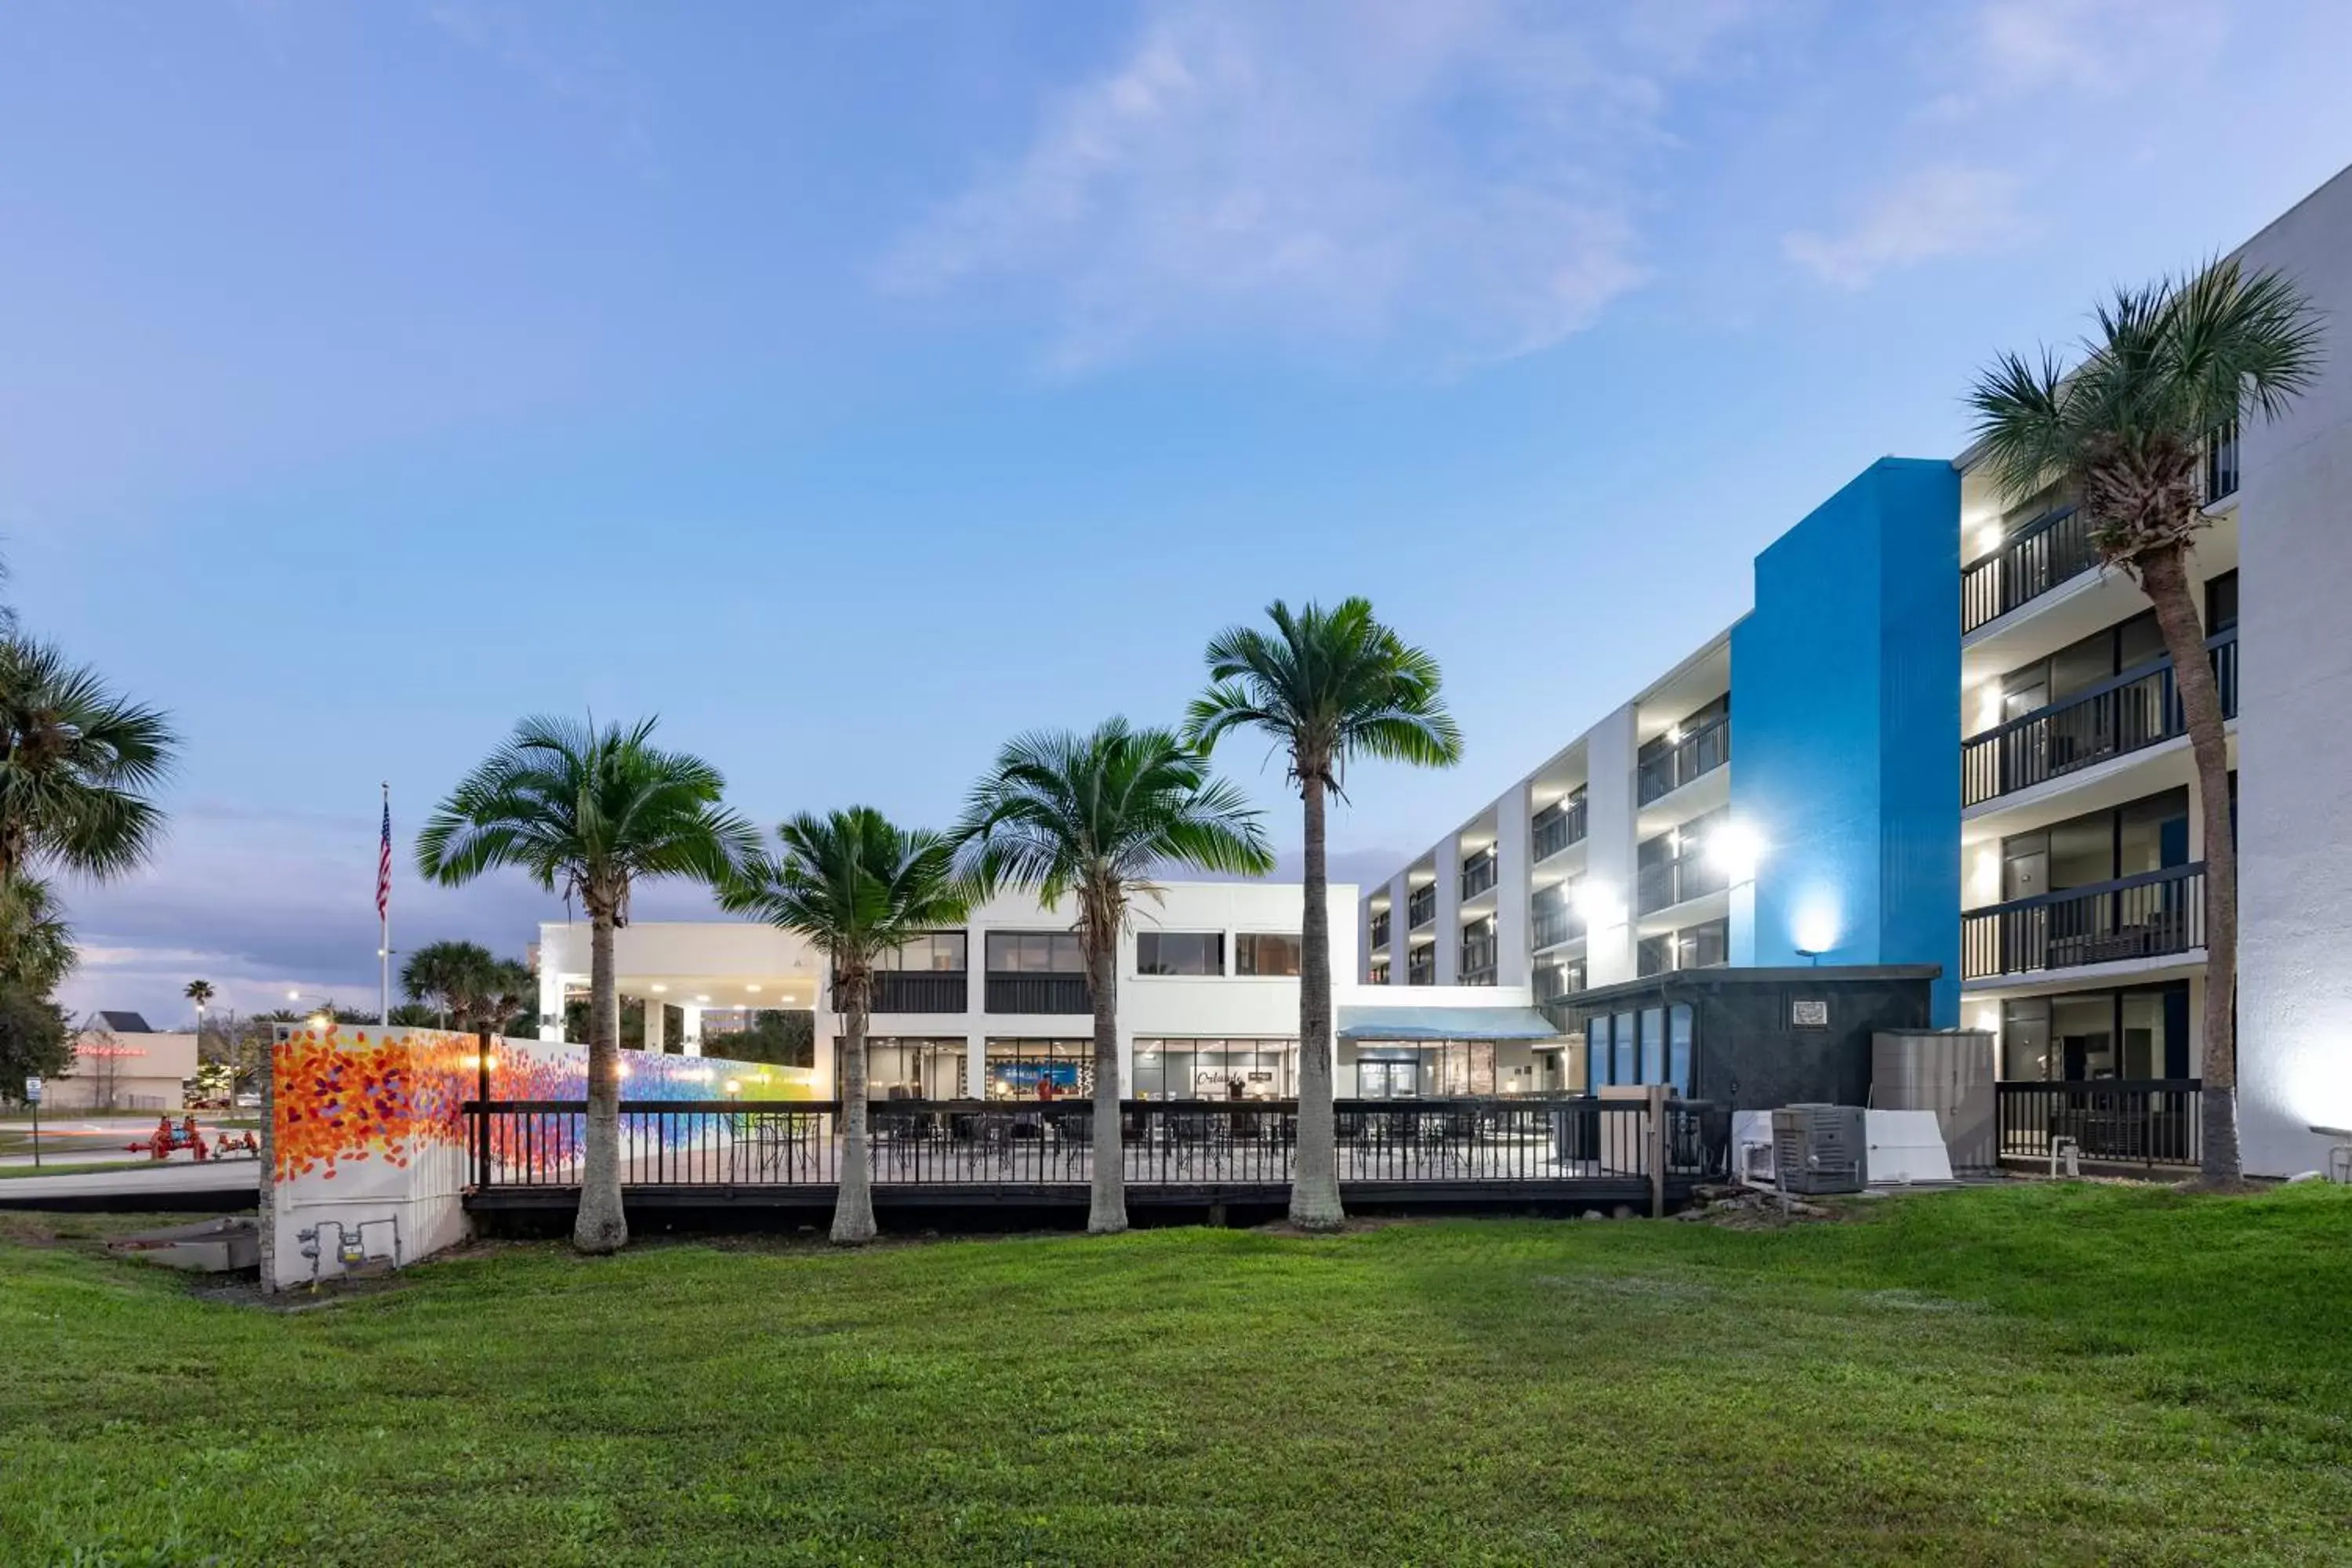 Property Building in Hotel Monreale Express International Drive Orlando